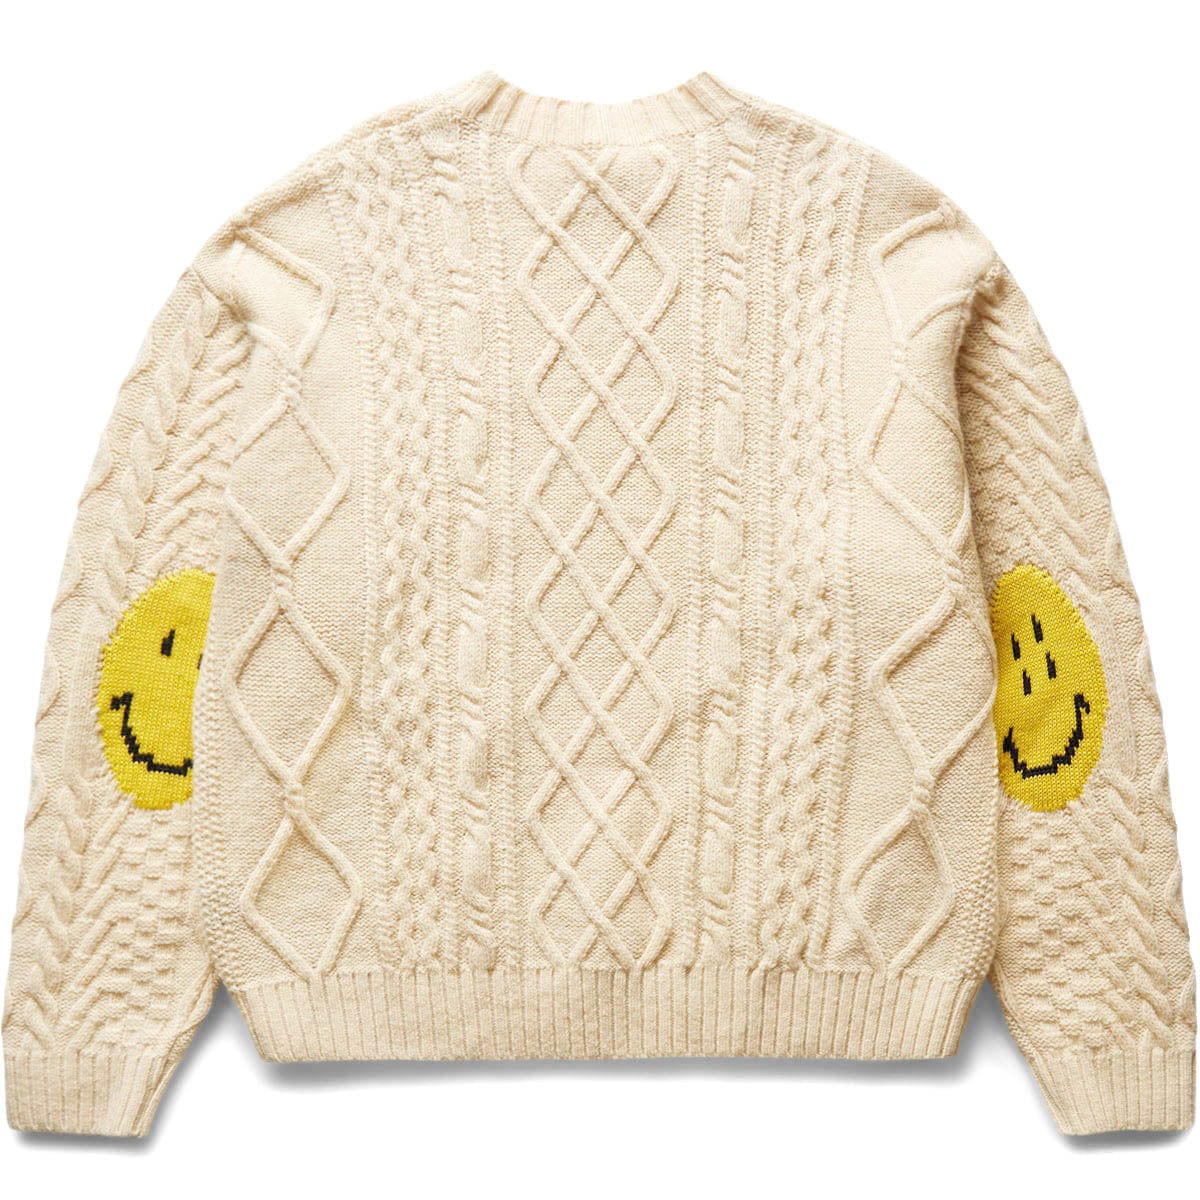 Kapital Knitwear 5G WOOL CABLE KNIT HAPPY PATCH CREW SWEATER